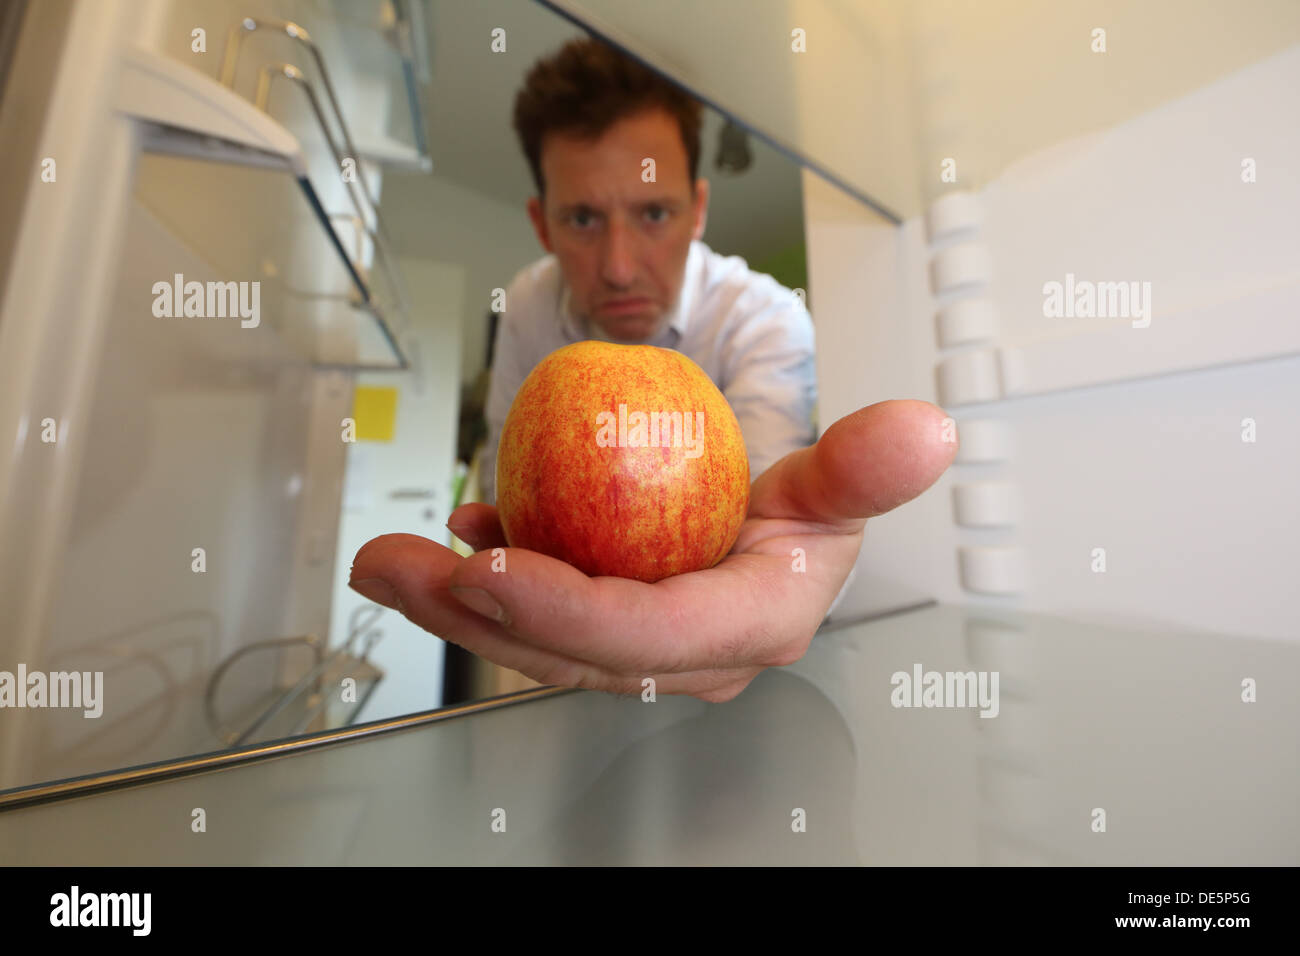 Berlin, Germany, Claus brings an apple from his empty fridge Stock Photo